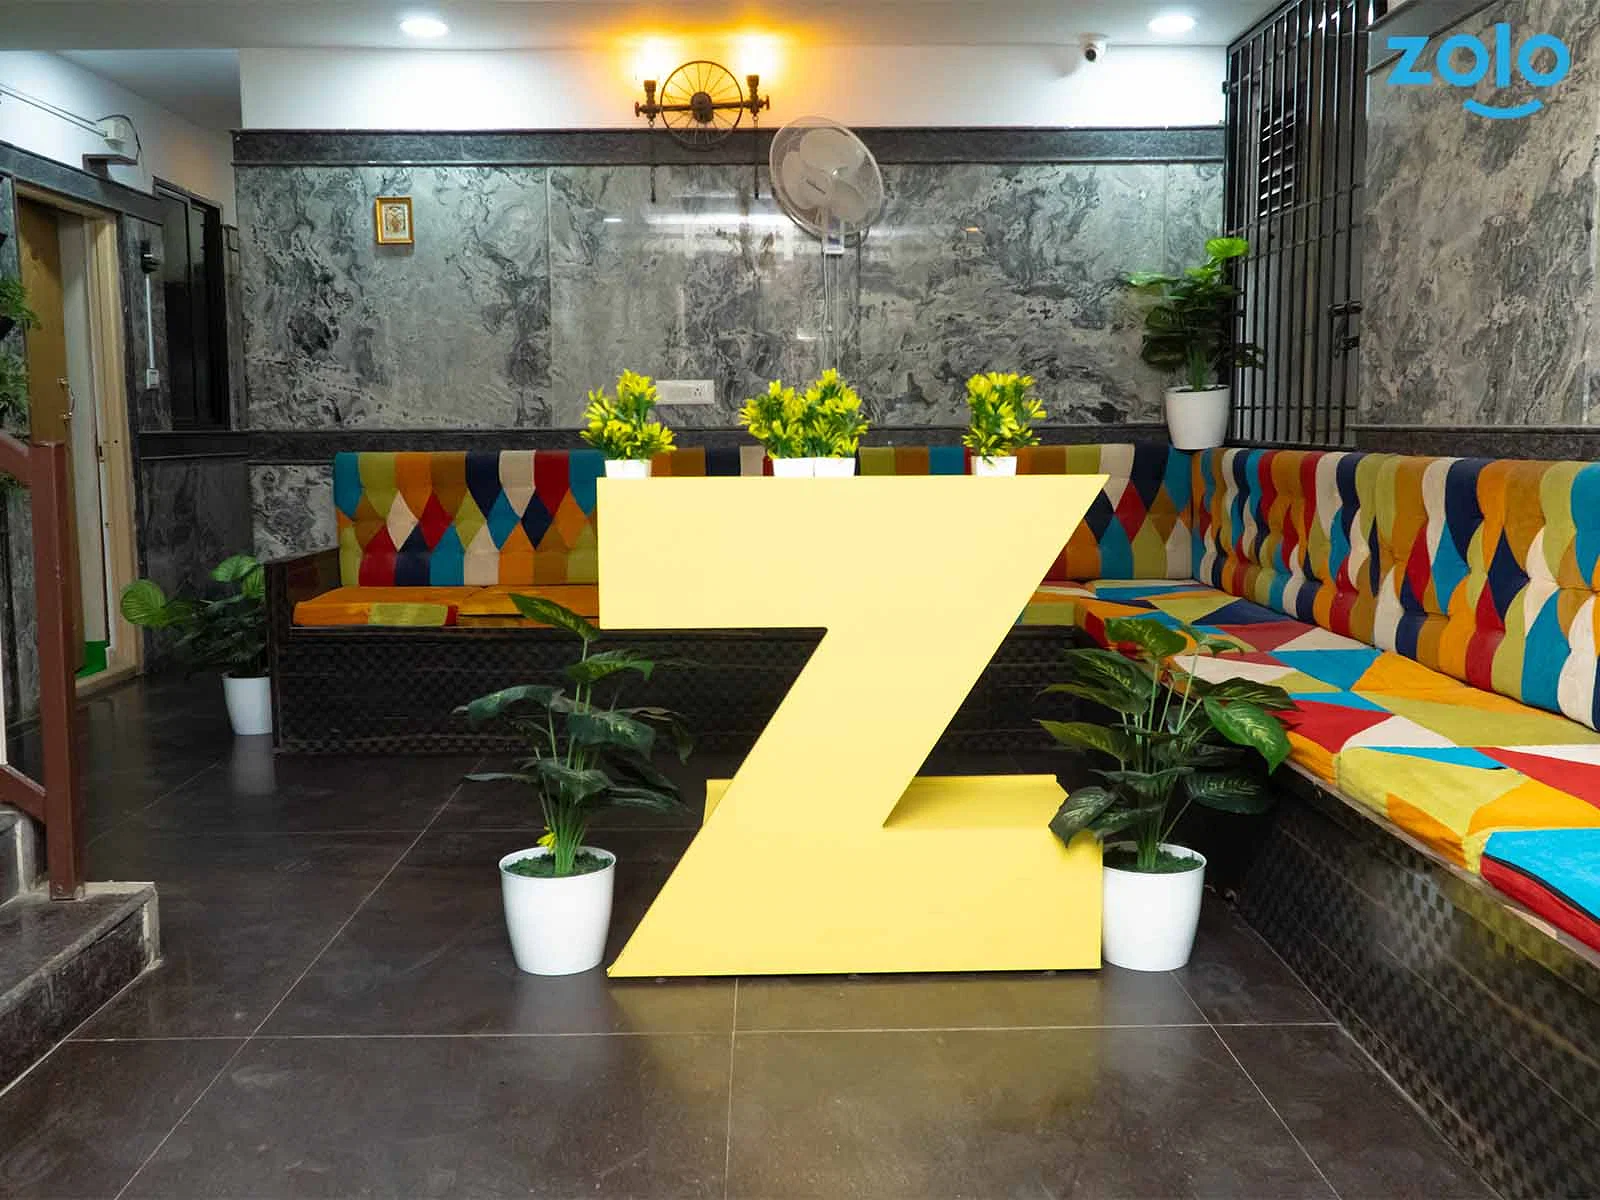 luxury PG accommodations with modern Wi-Fi, AC, and TV in Electronic City Phase 2-Bangalore-Zolo Highstreet B